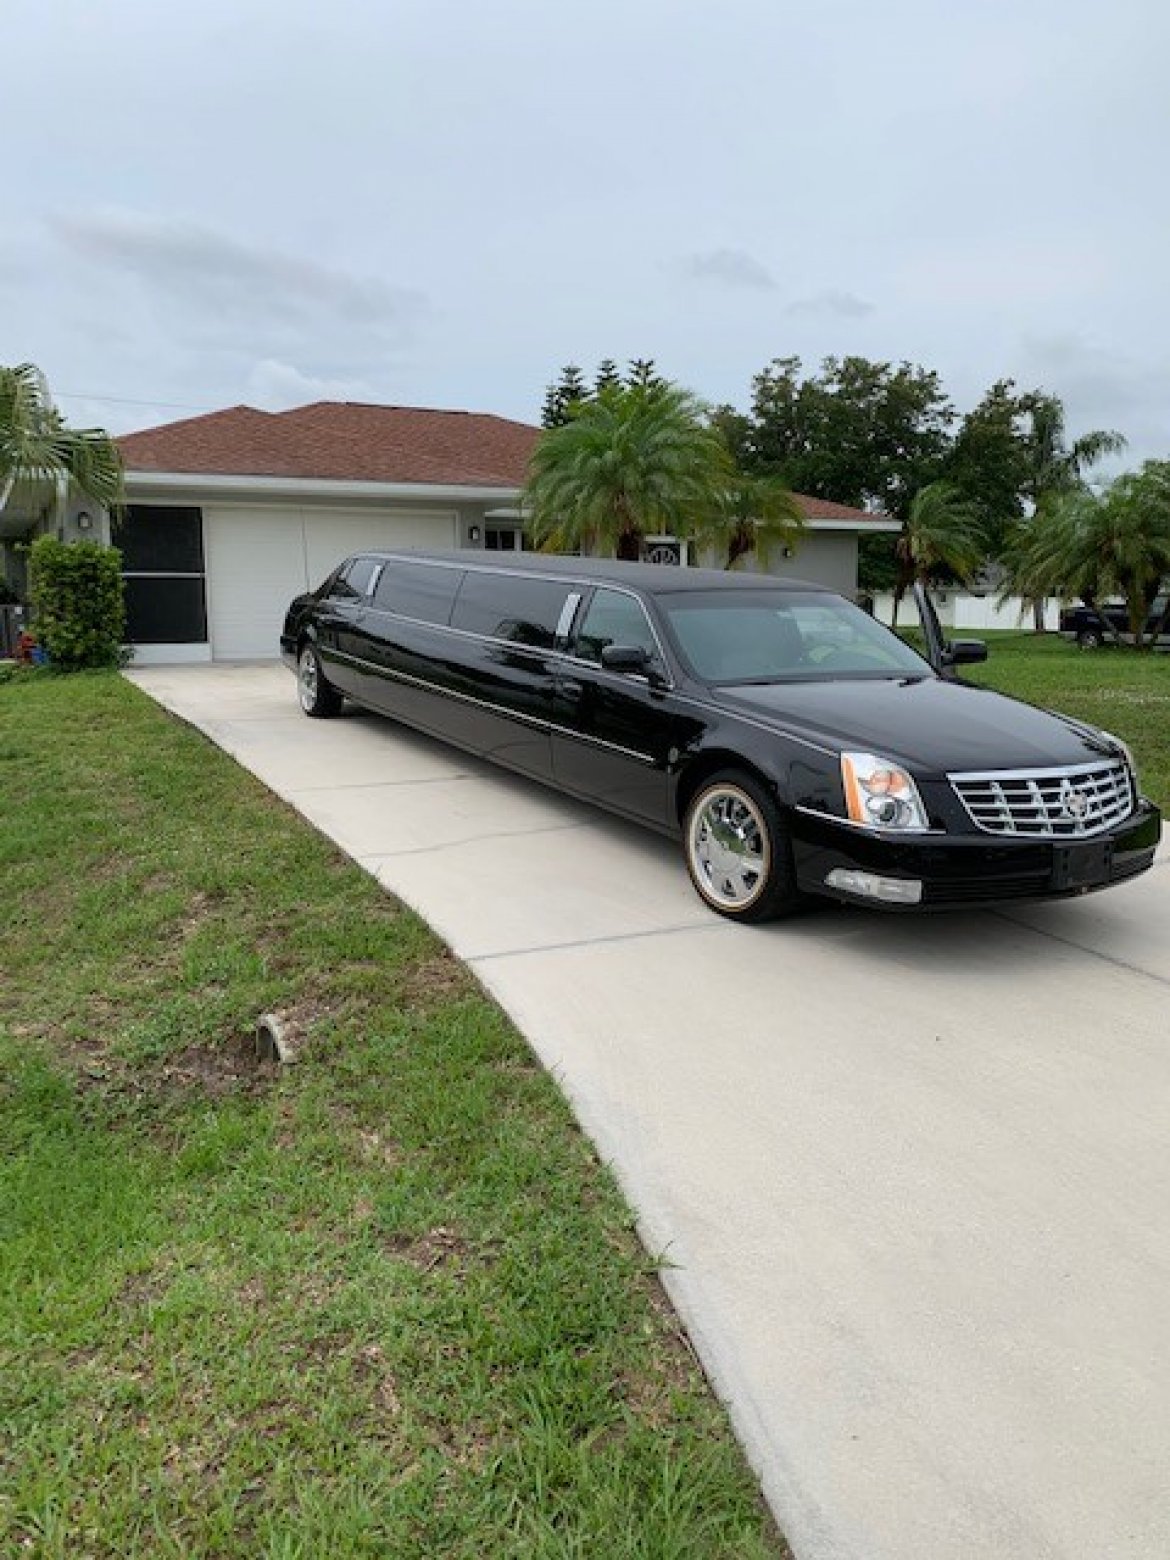 Limousine for sale: 2007 Cadillac DTS 130&quot; by Federal Coach